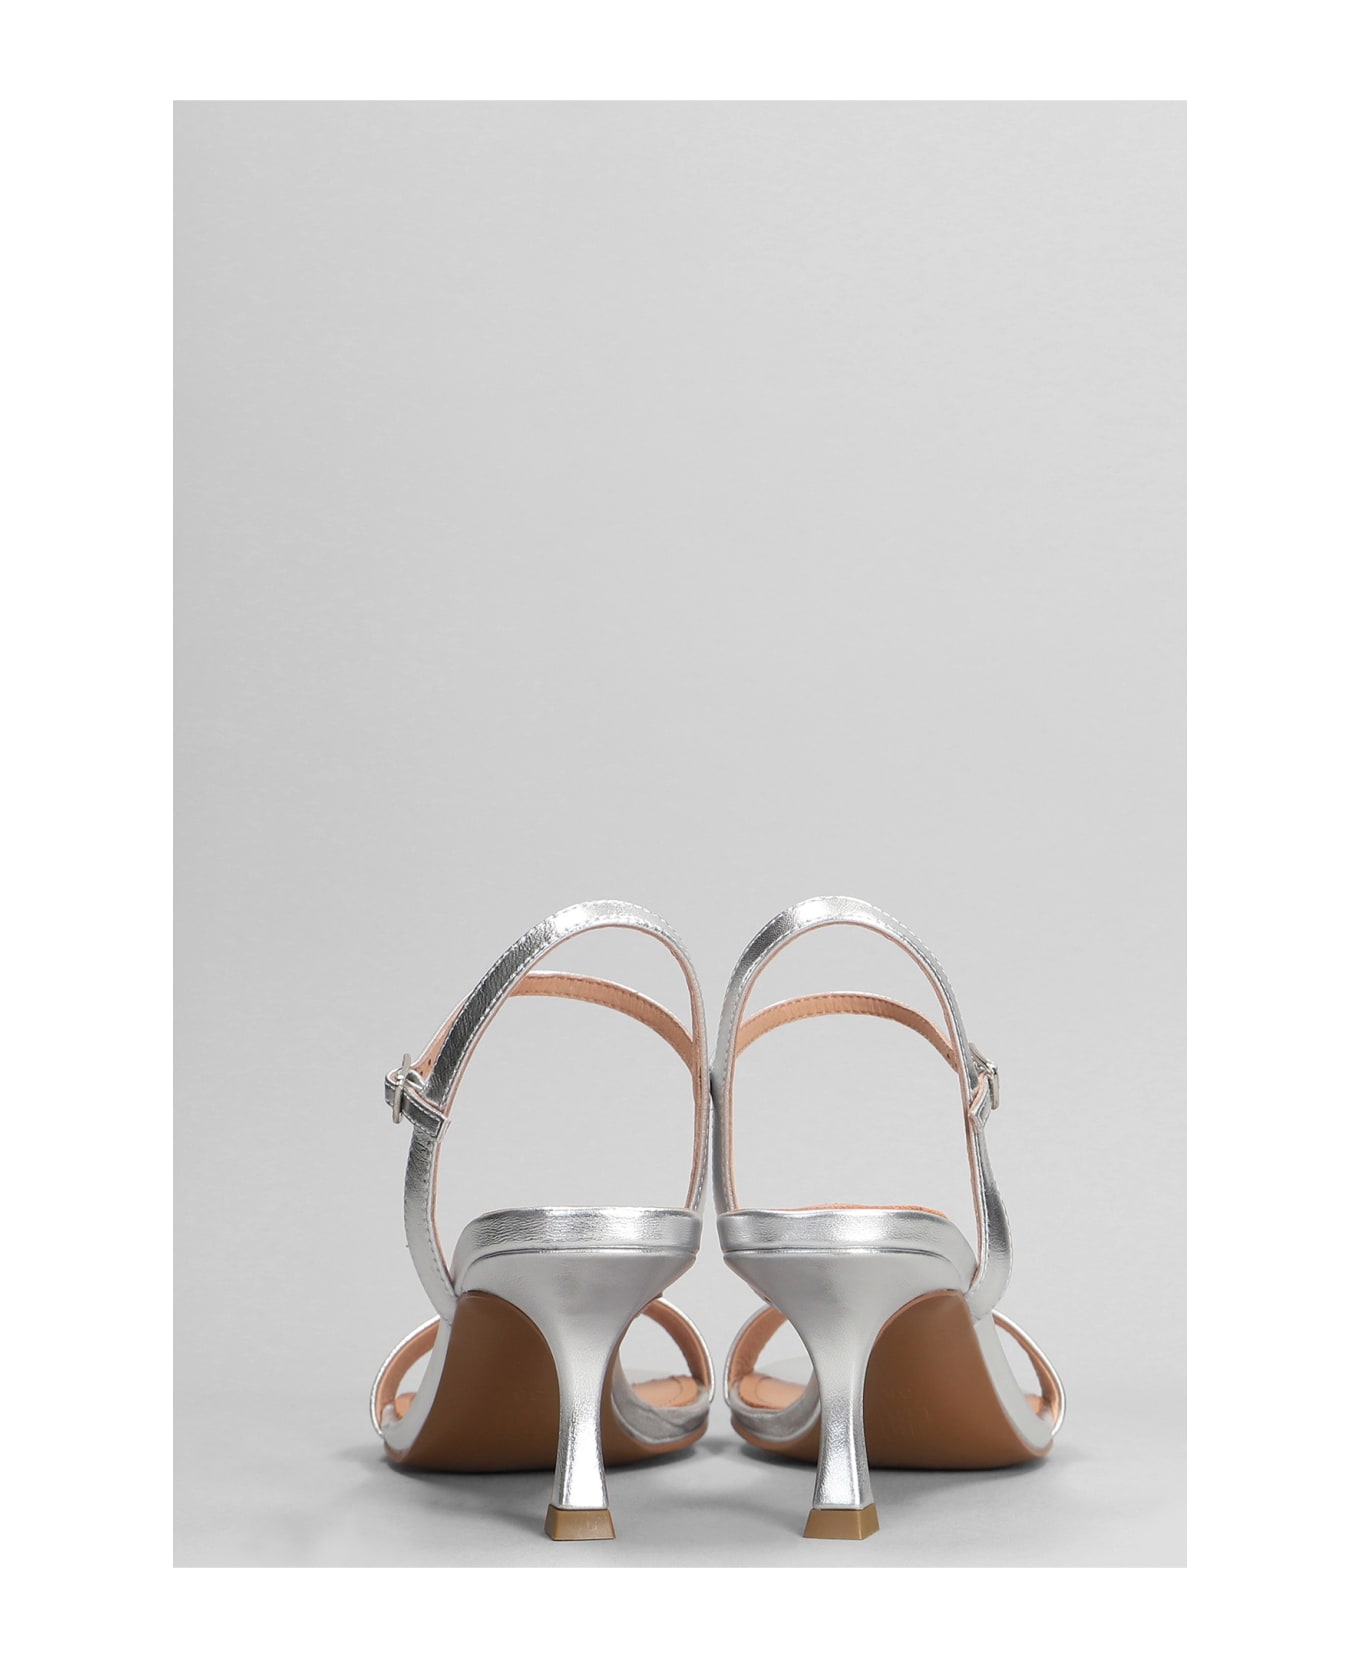 Bibi Lou Lotus 65 Sandals In Silver Leather - silver